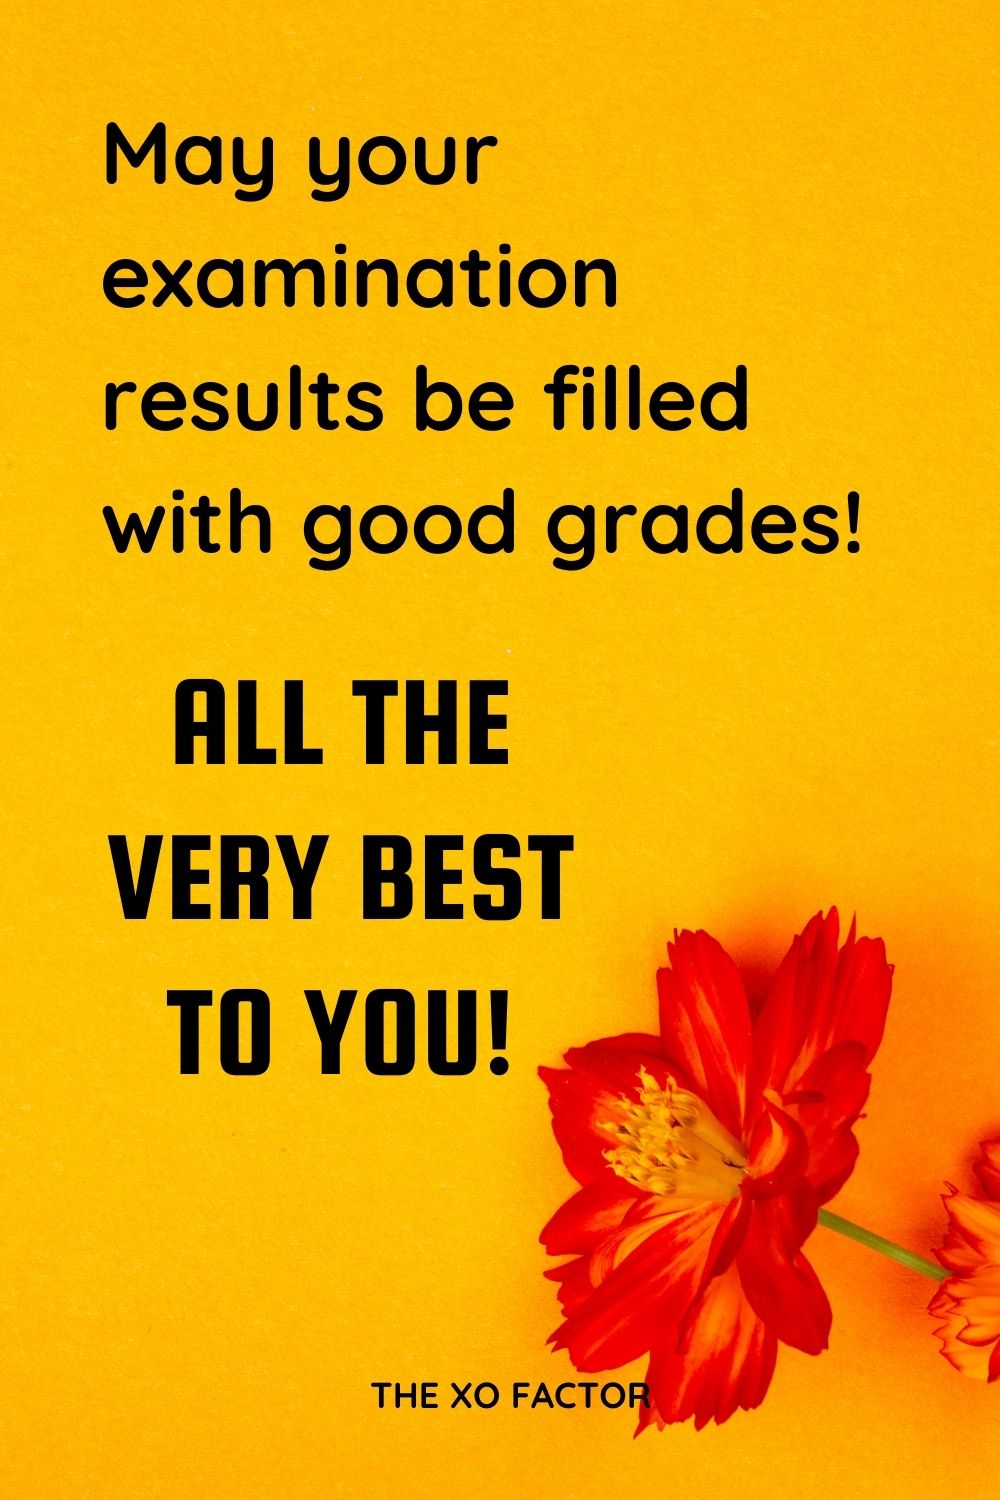 May your examination results be filled with good grades. All the very best to you!